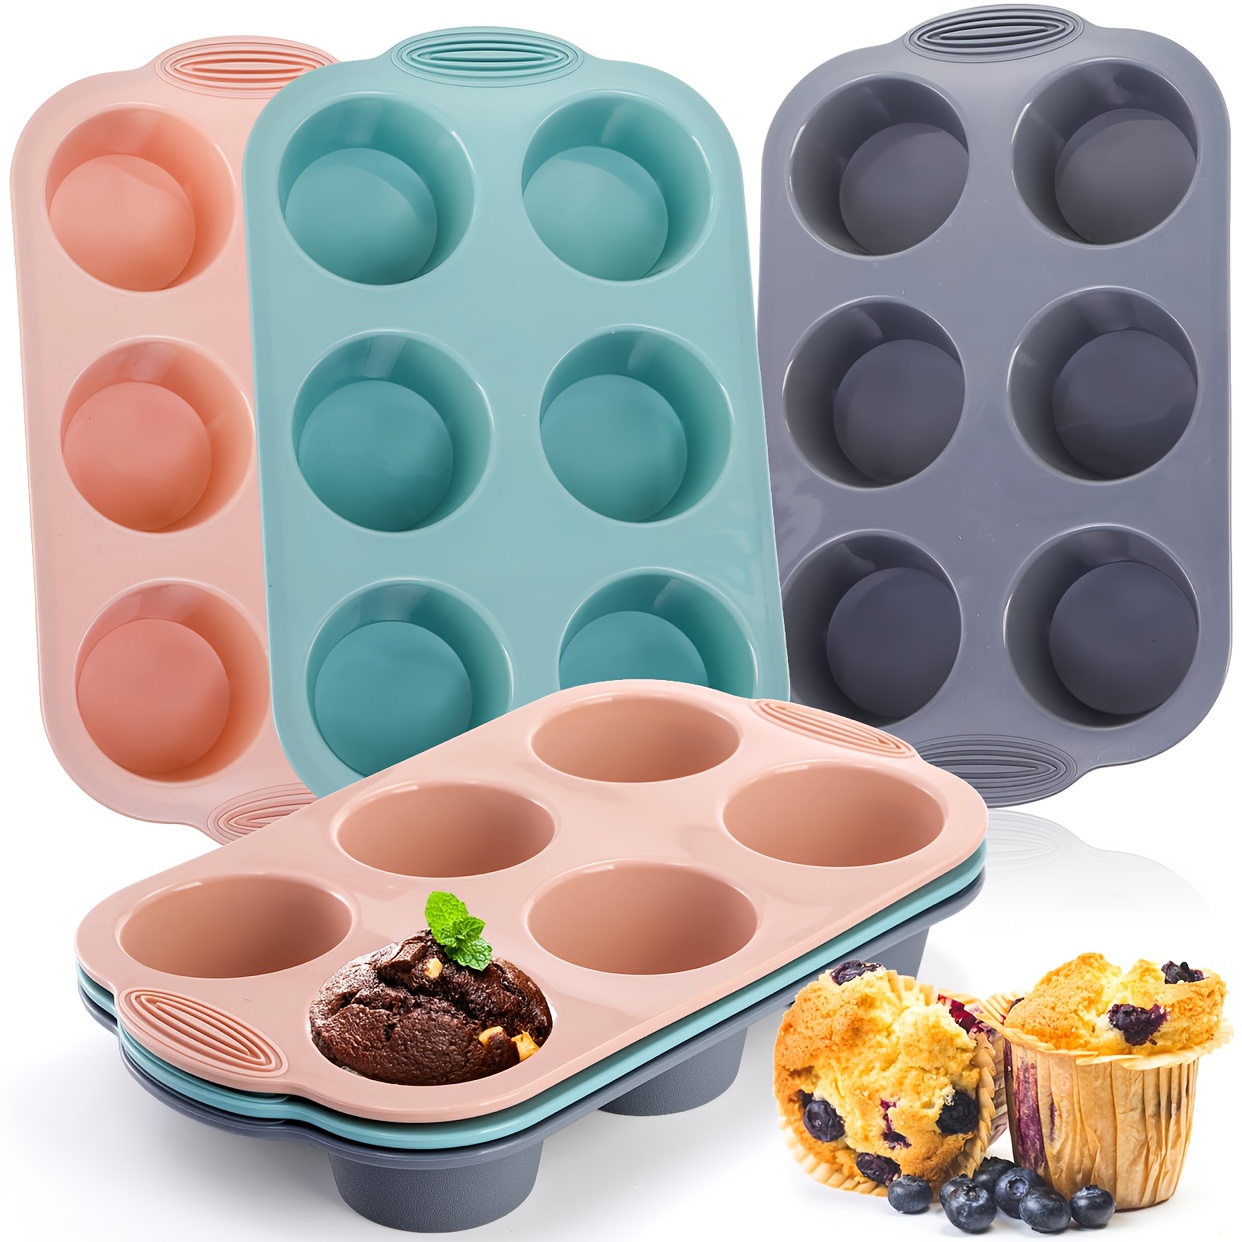 

Non-stick Silicone Muffin Pan - 6/12 Cavity, Food Grade Bpa-free Cupcake & Brownie Baking Tray, Dishwasher Safe, Perfect For Weddings & Everyday Use